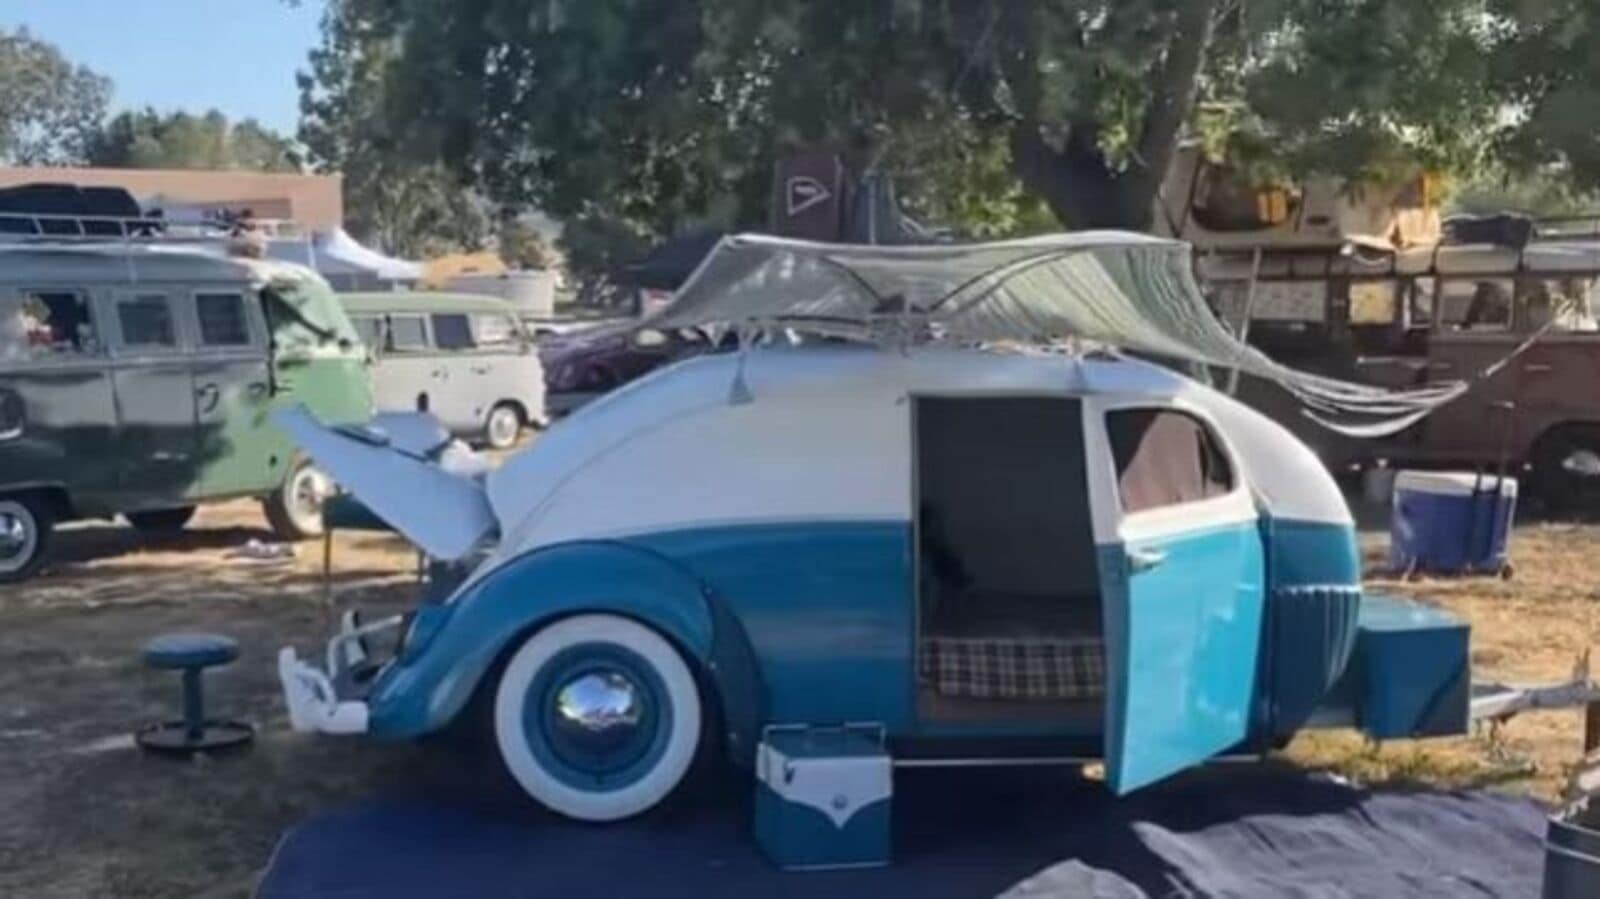 VW Bus With Audi S3 Engine And Matching Camper Has Us Seeing Double